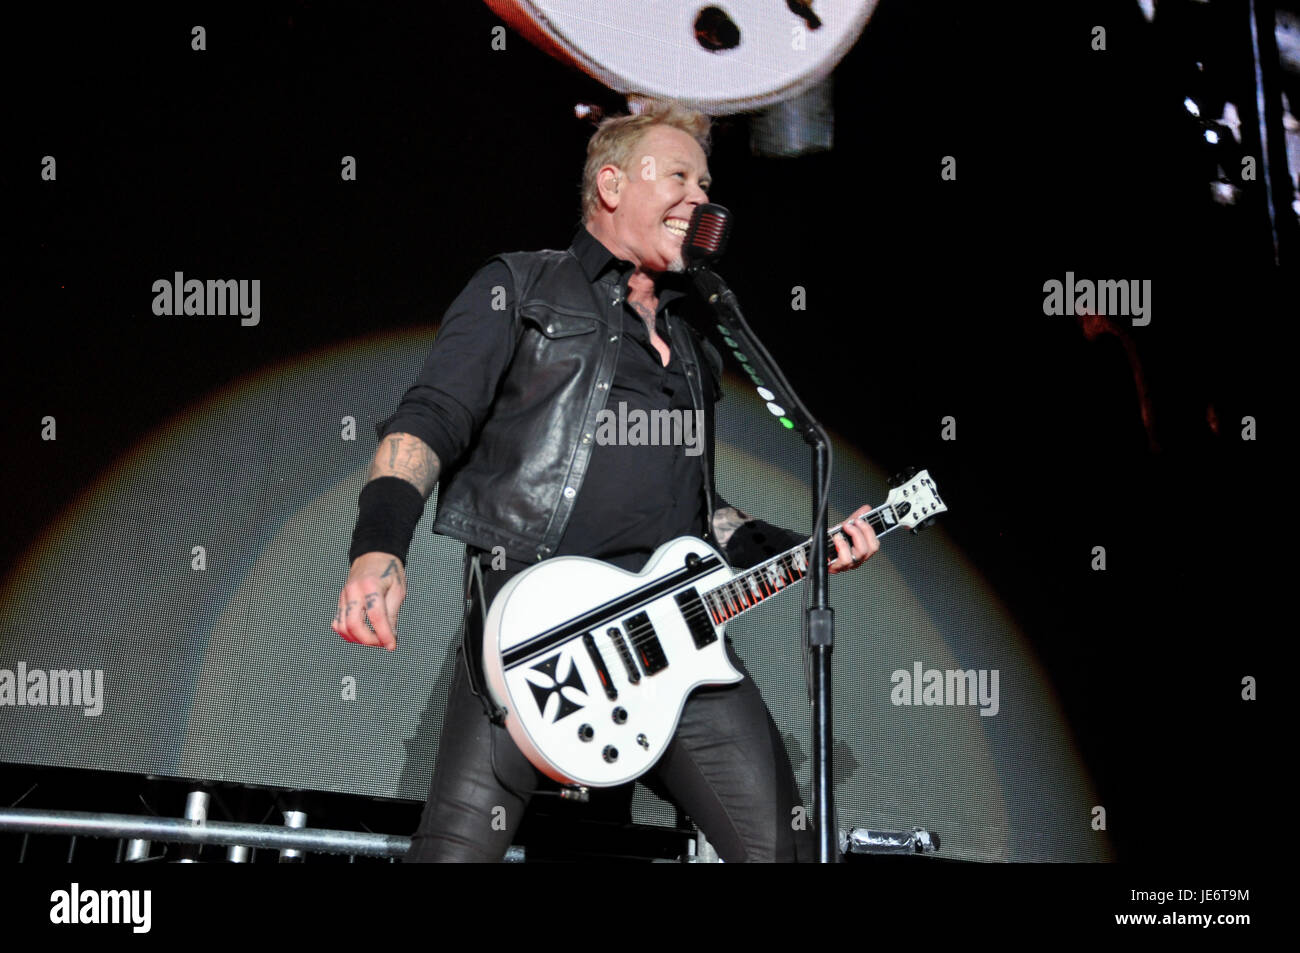 Metallica on the WorldWired Tour 2017 performance at the Rock on the Range 2017 Music Festival at Mapfre Stadium  Featuring: Metallica, James Hetfield Where: Columbus, Ohio, United States When: 22 May 2017 Credit: C.M. Wiggins/WENN.com Stock Photo